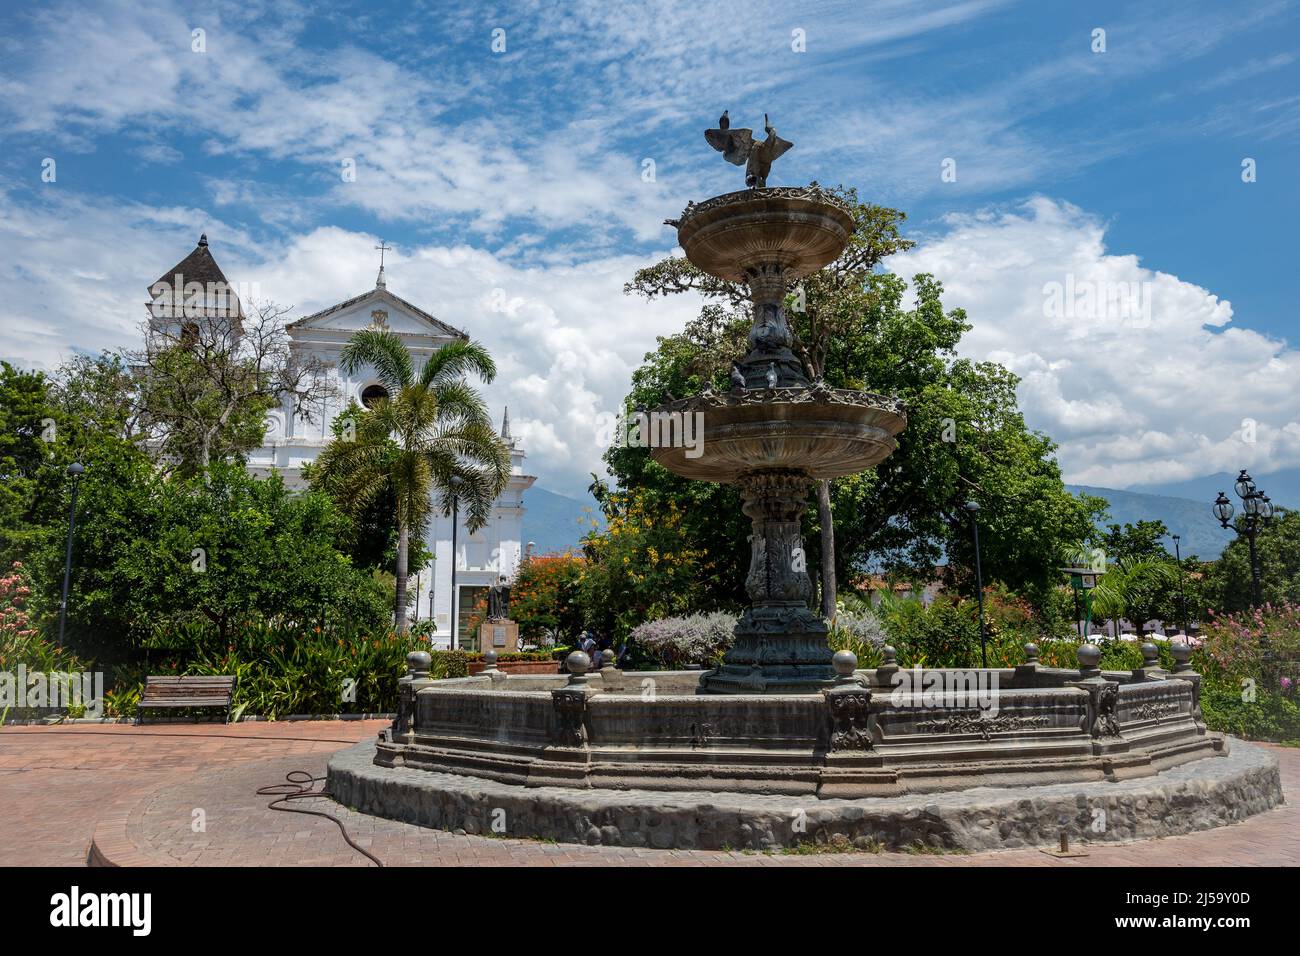 Water fountain at the town center of Santa Fe de Antioquia, Colombia, South America. Stock Photo